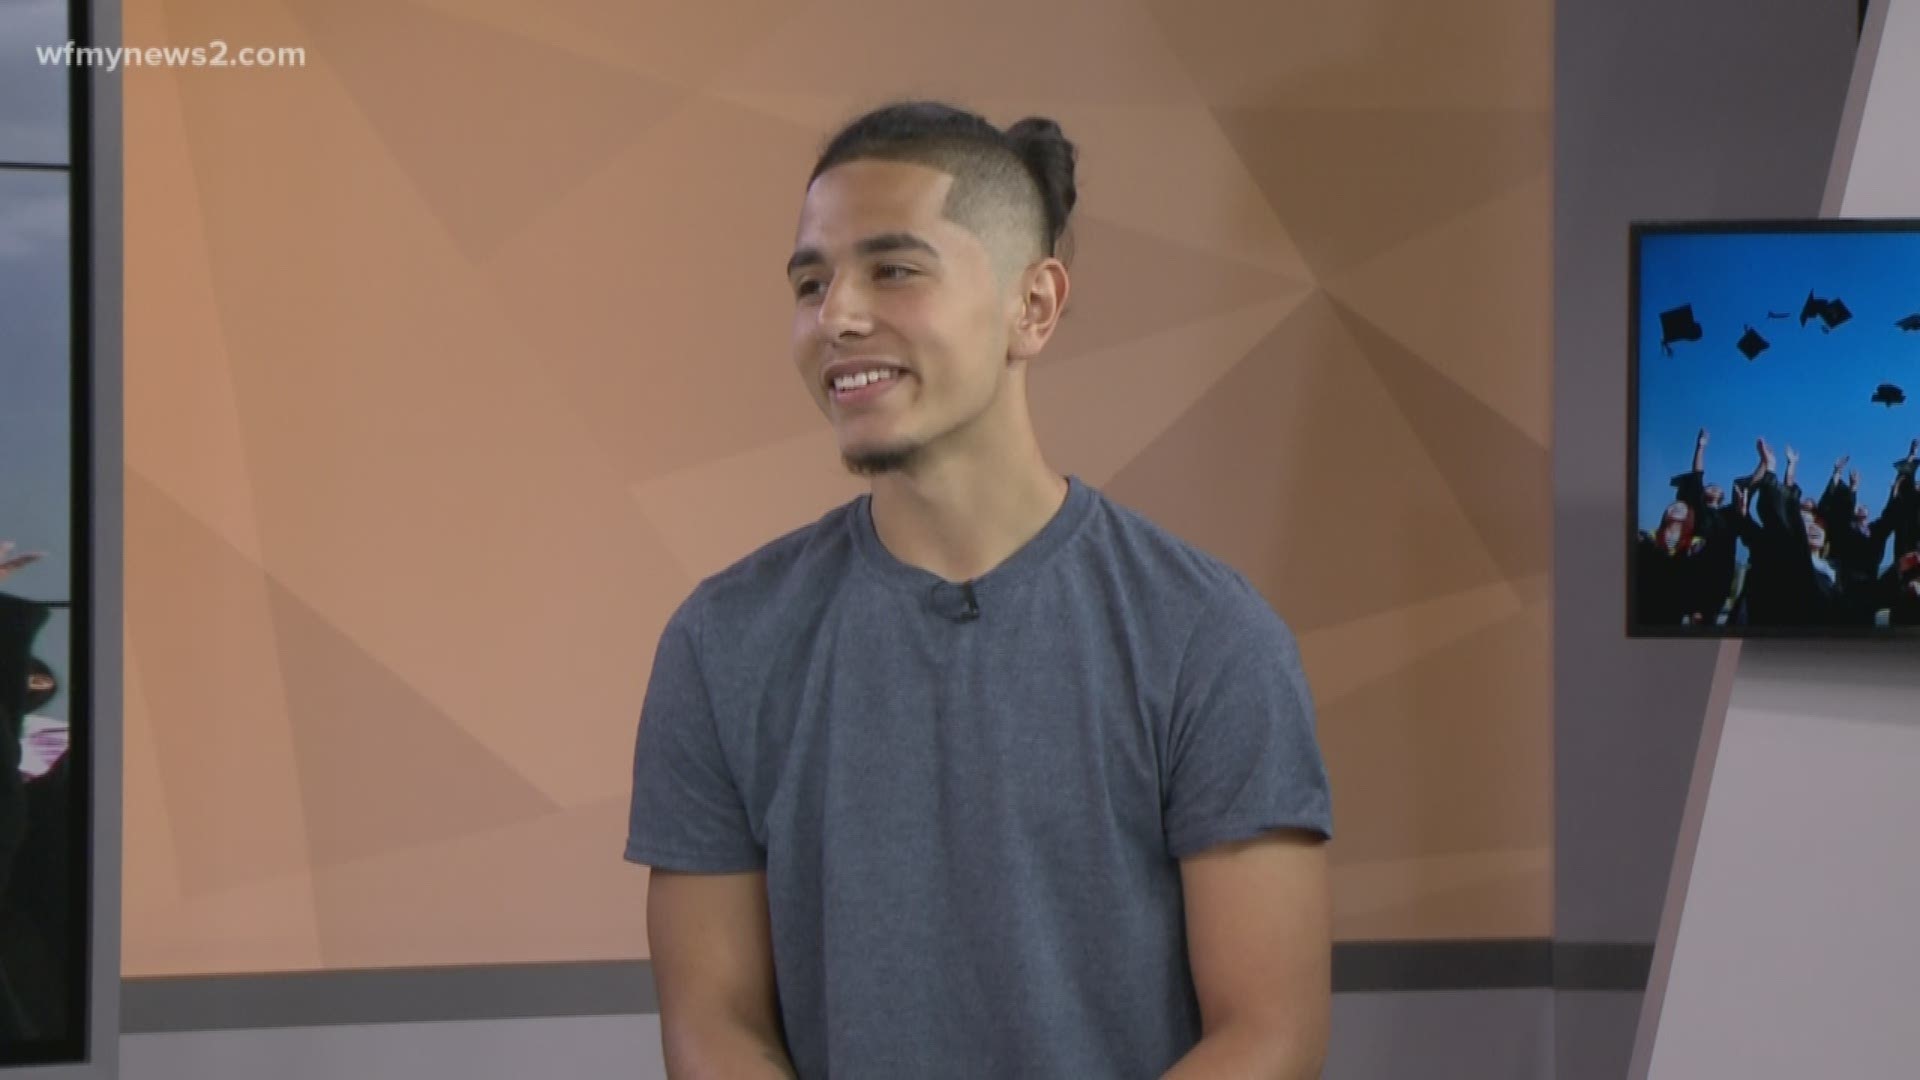 Northeast High School senior Ignacio Alvarez is the first in his family to graduate high school and go to college.  He shared his excitement about attending NC A&T in the fall Monday on the Good Morning Show.